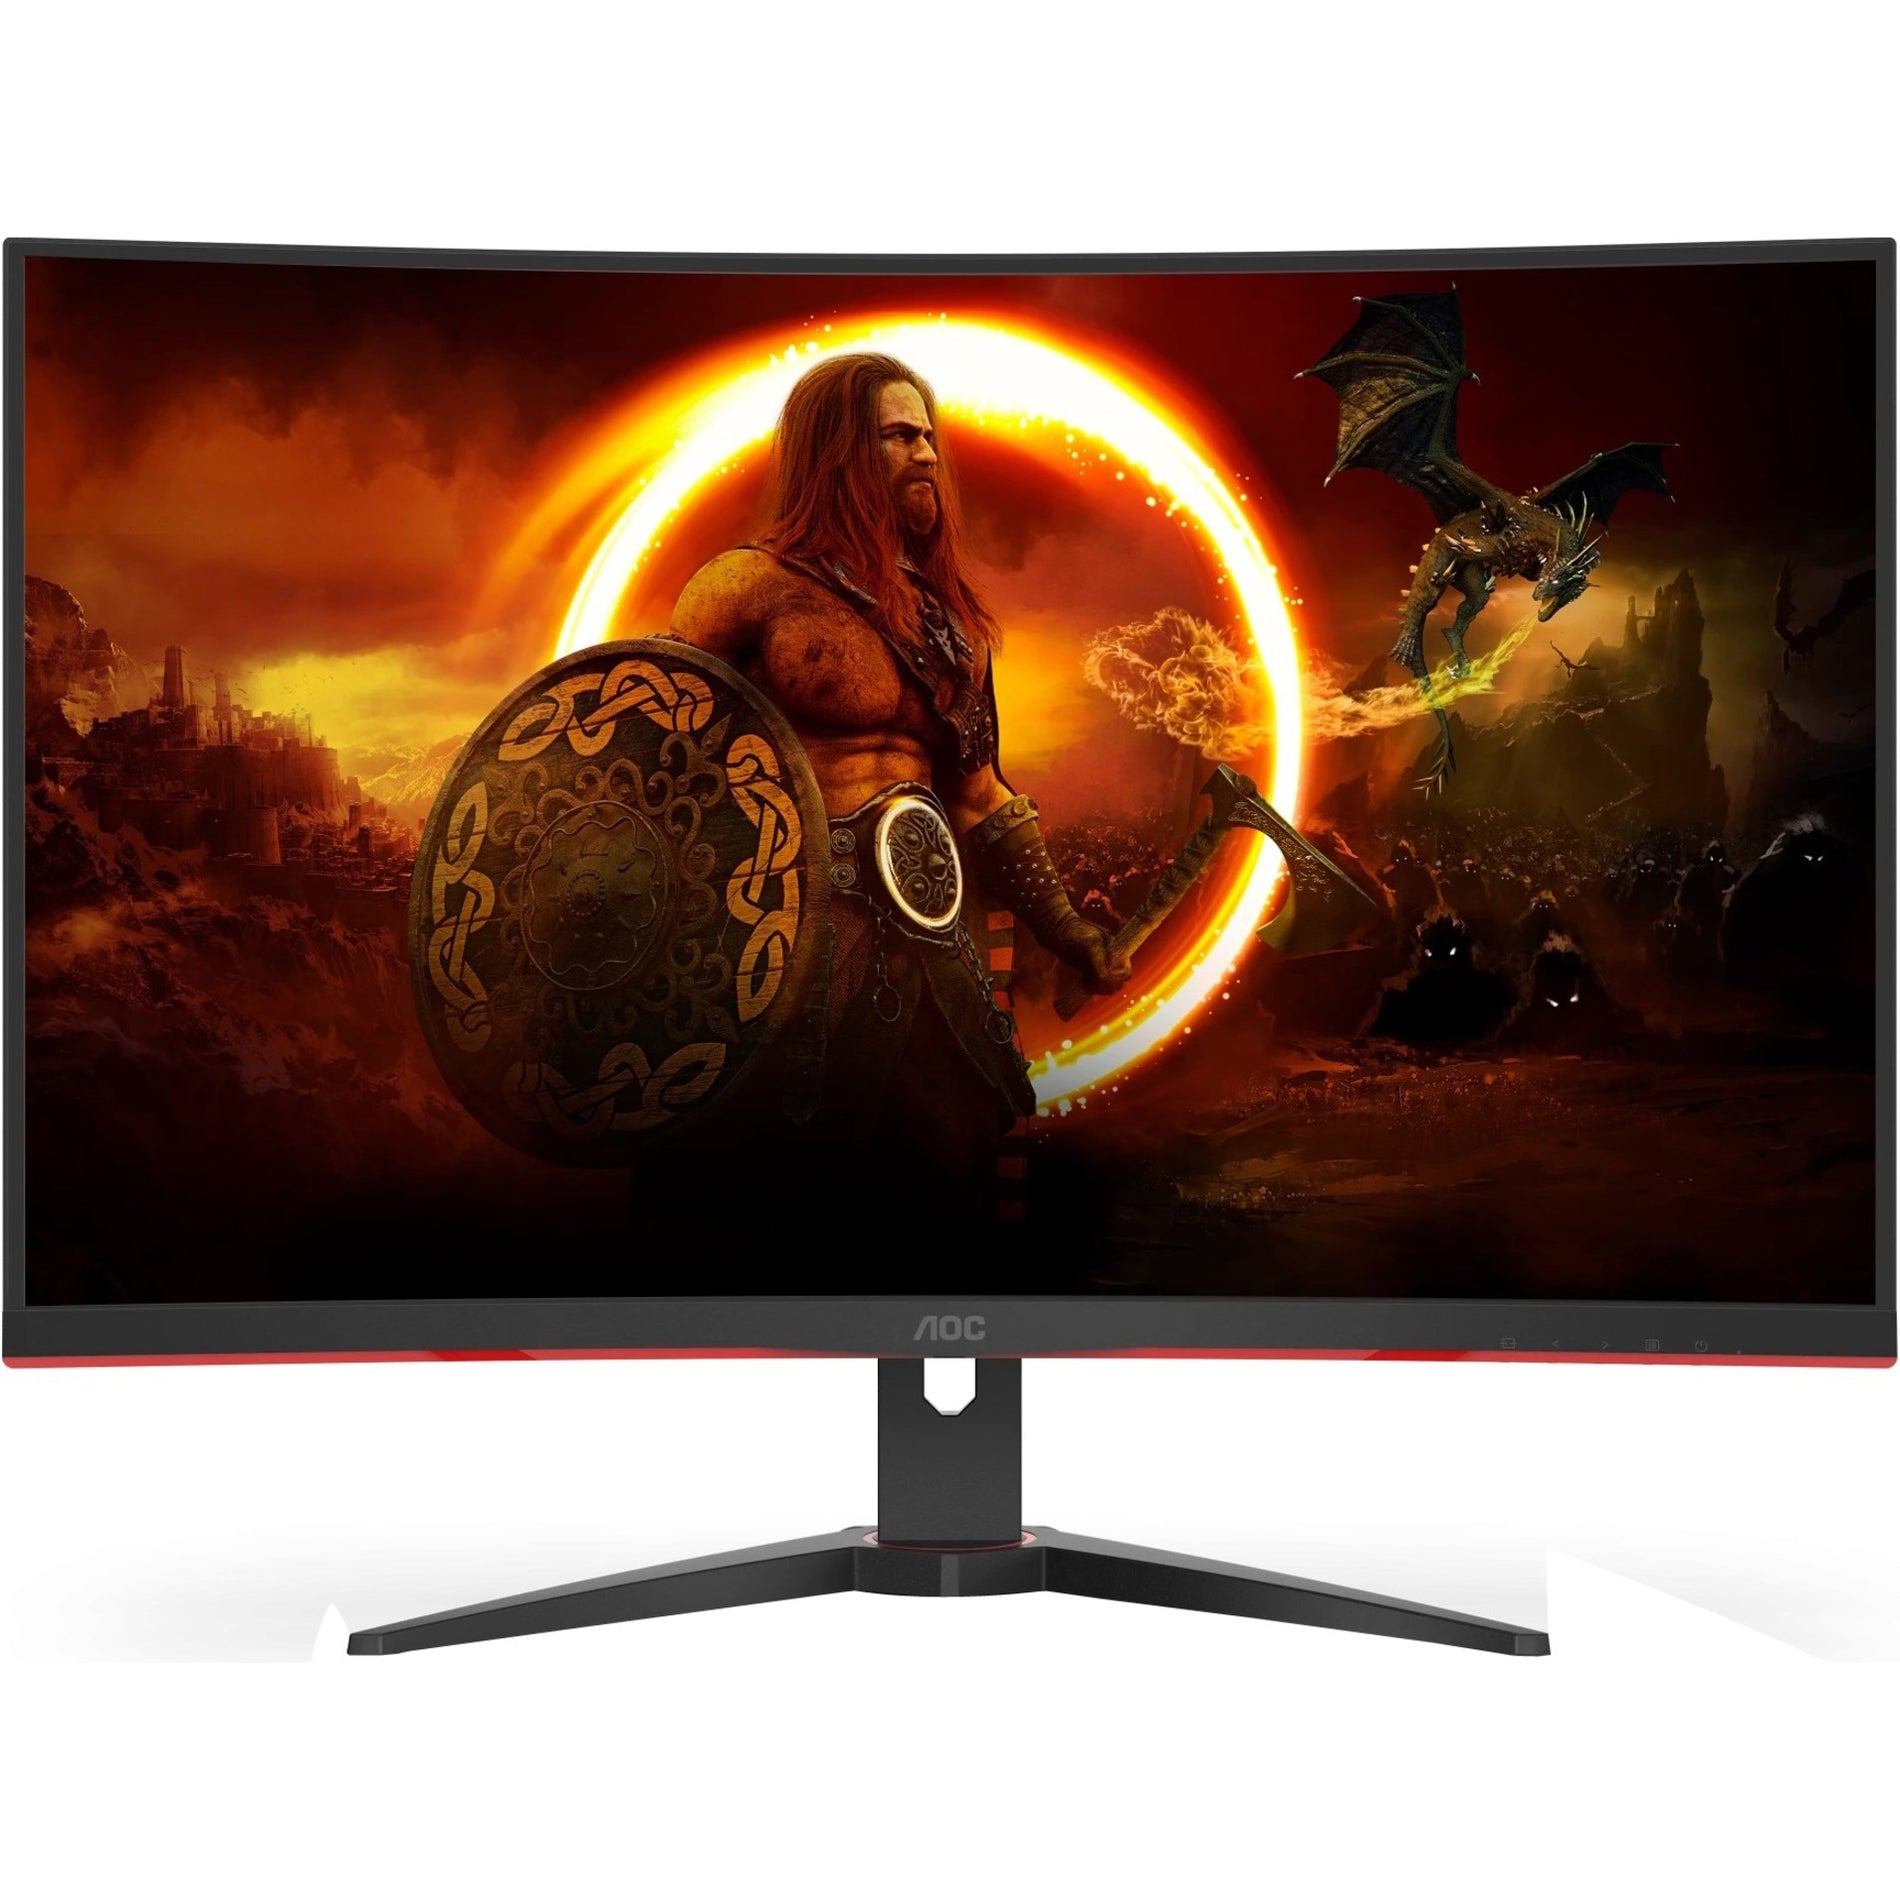 AOC C32G2E Curved Gaming Monitor, 31.5" Full HD, 165Hz Refresh Rate, FreeSync, Red/Black